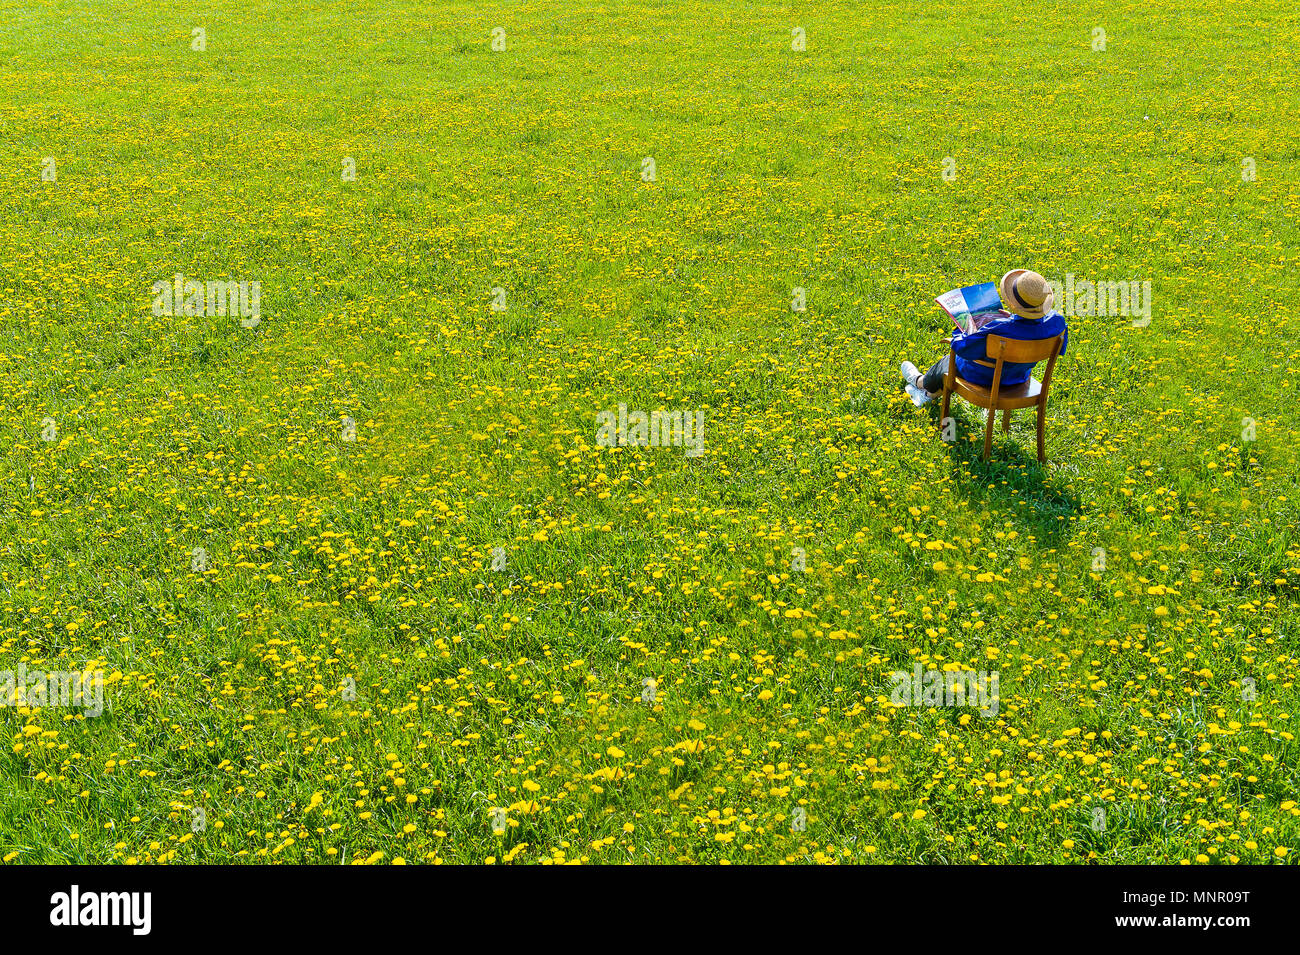 Spring Meadow with Dandelion, Woman with straw hat sits on chair and reads, Bavaria, Germany Stock Photo